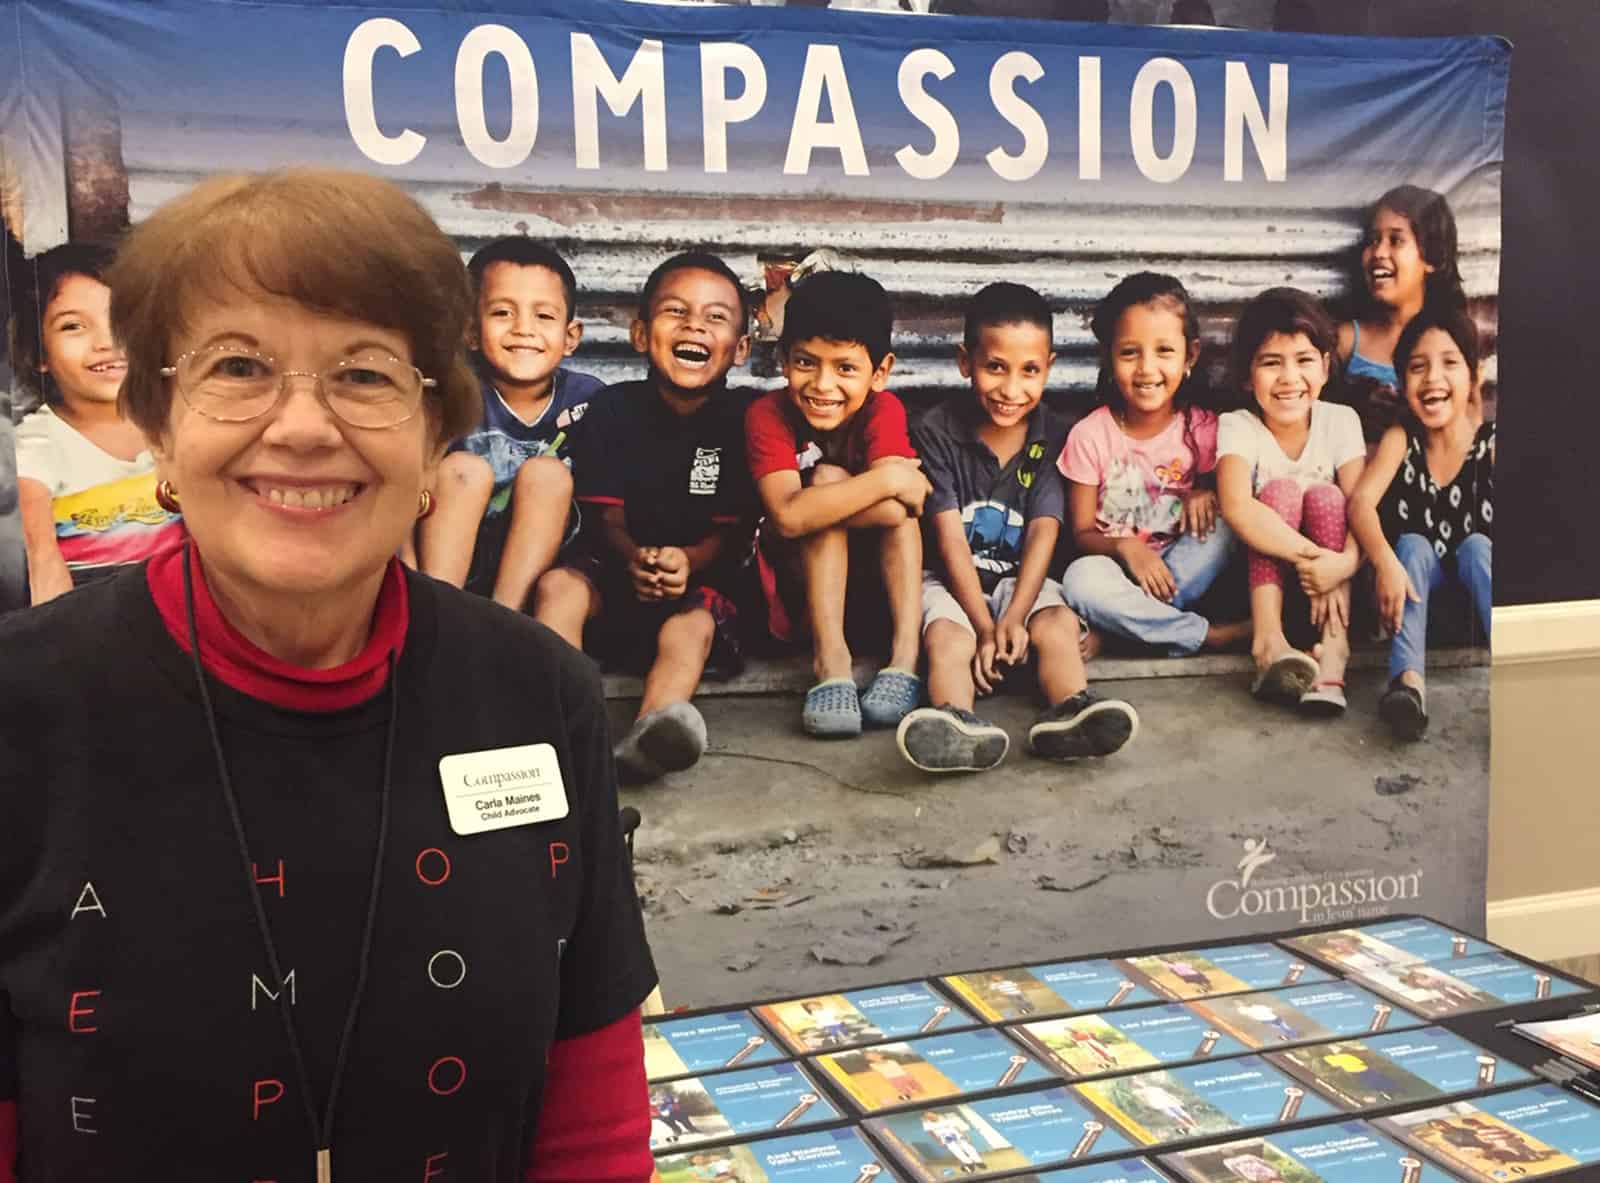 Carla Maines at a Compassion event table